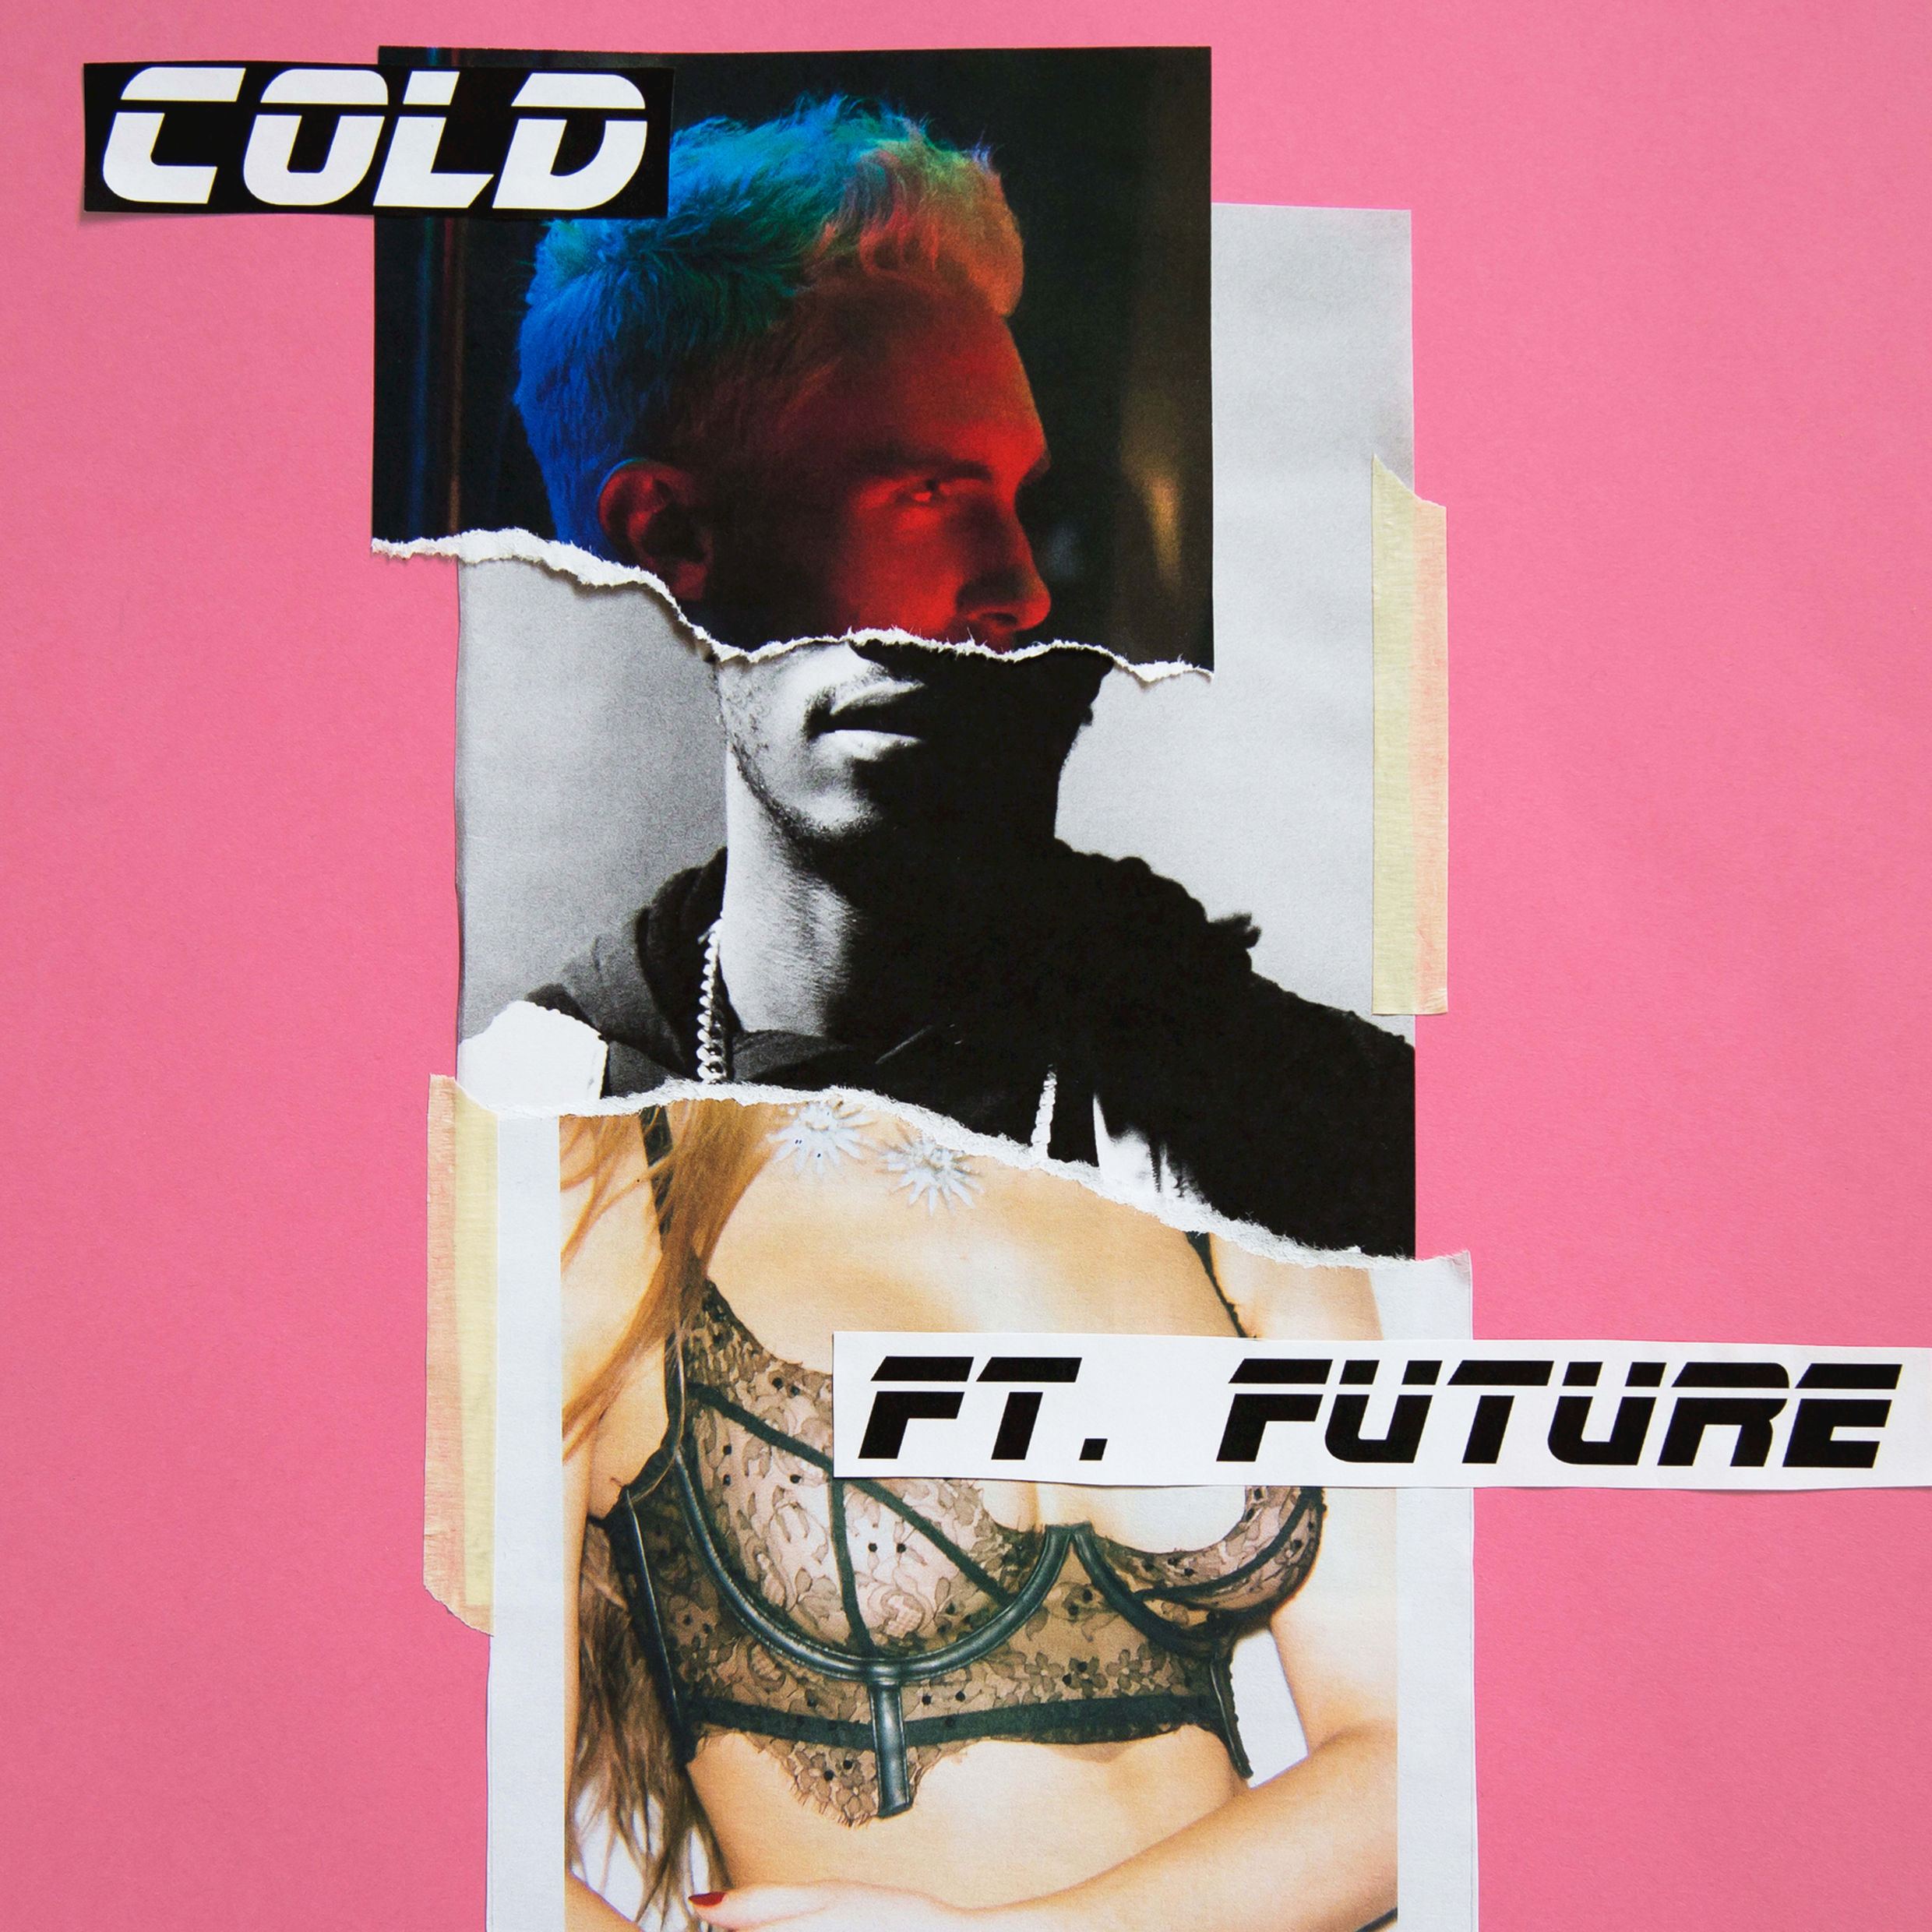 Maroon 5 feat. Future — Cold cover artwork